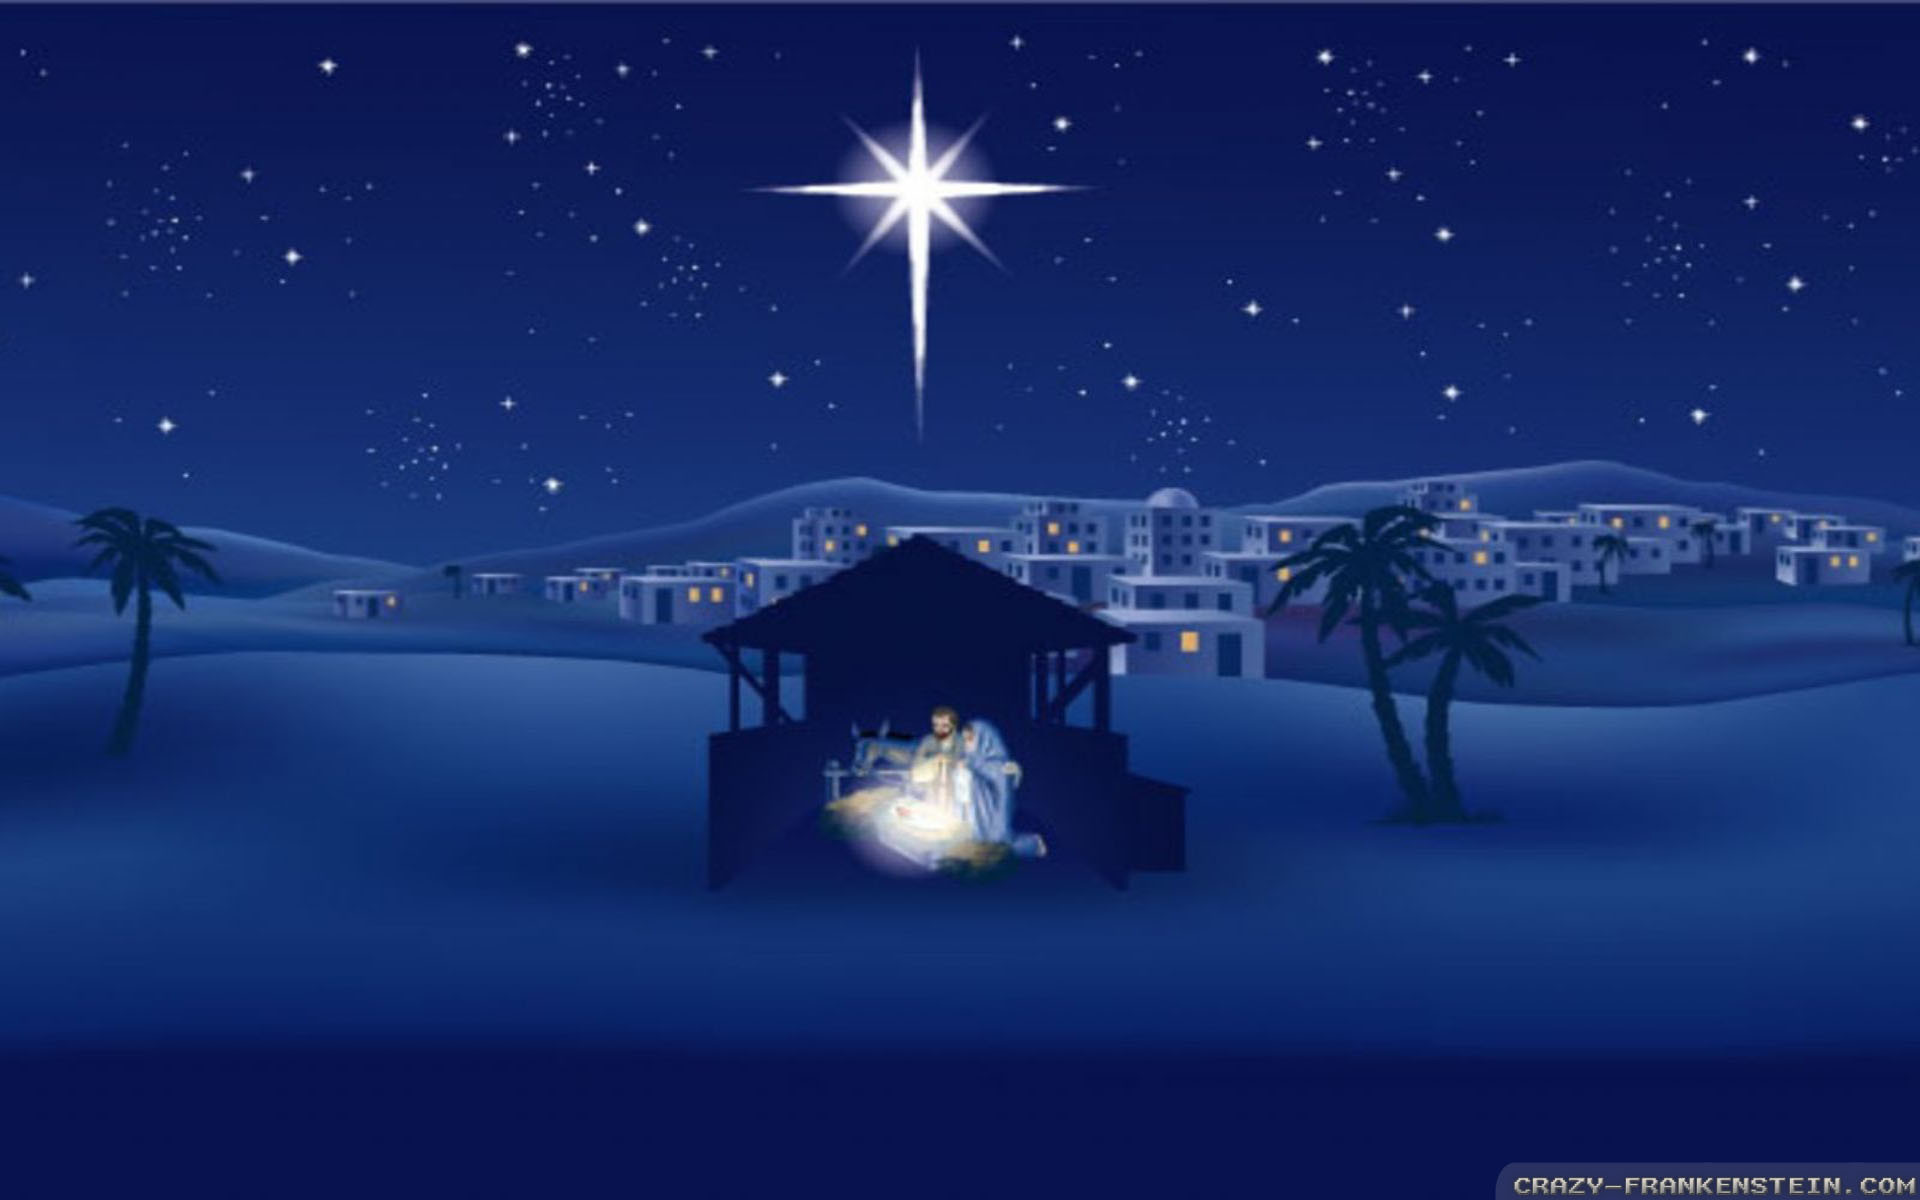 1920x1200 Wallpaper: The Birth Of Christ Religious wallpapers. Resolution: 1024x768 |  1280x1024 | 1600x1200. Widescreen Res: 1440x900 | 1680x1050 | 